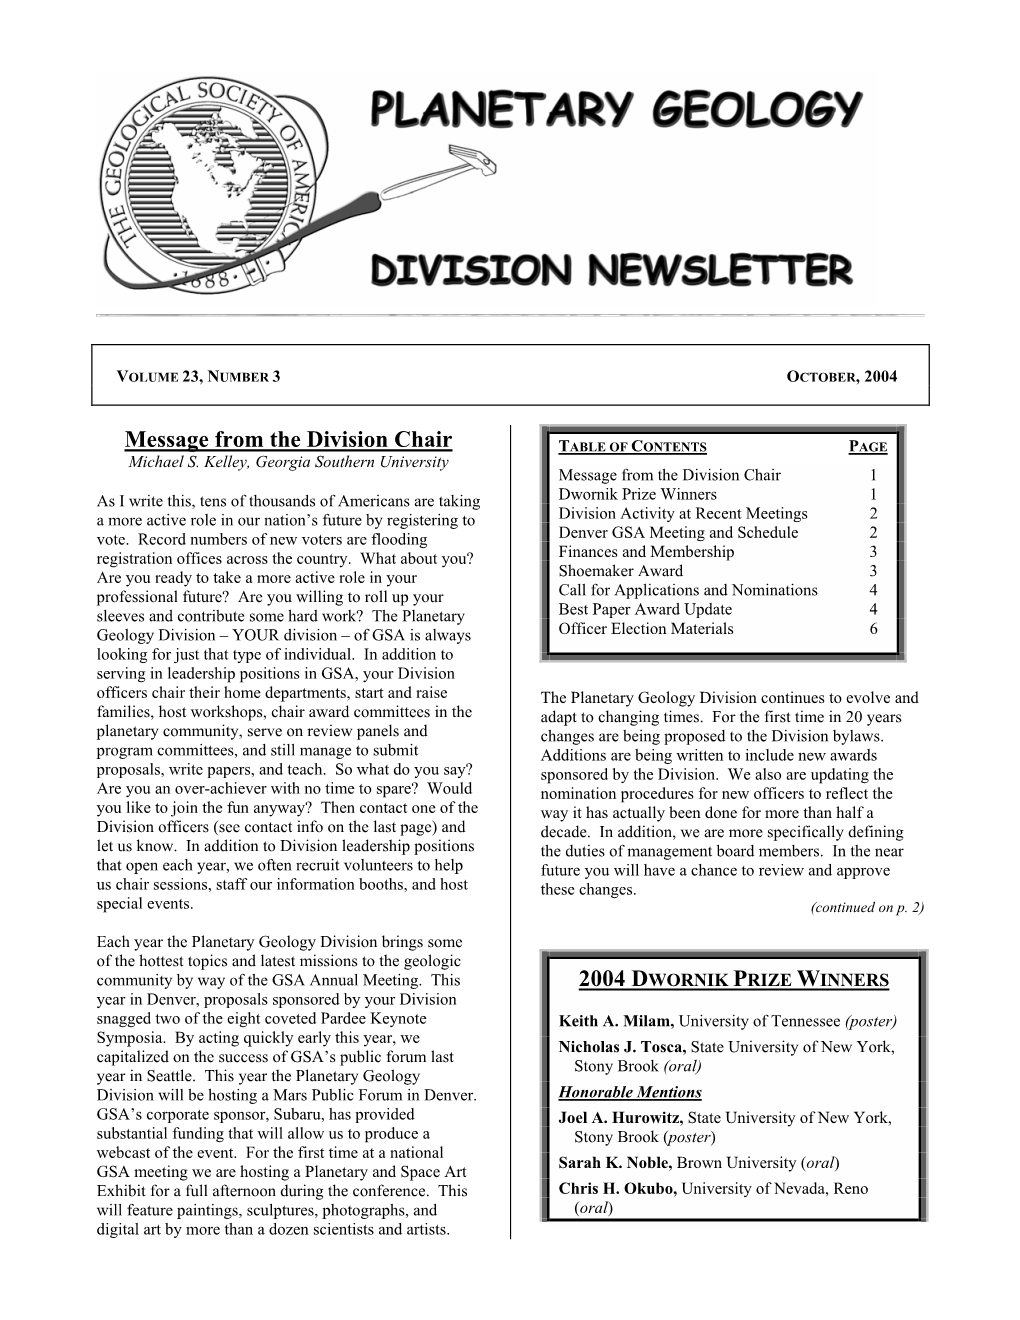 Message from the Division Chair TABLE of CONTENTS PAGE Michael S